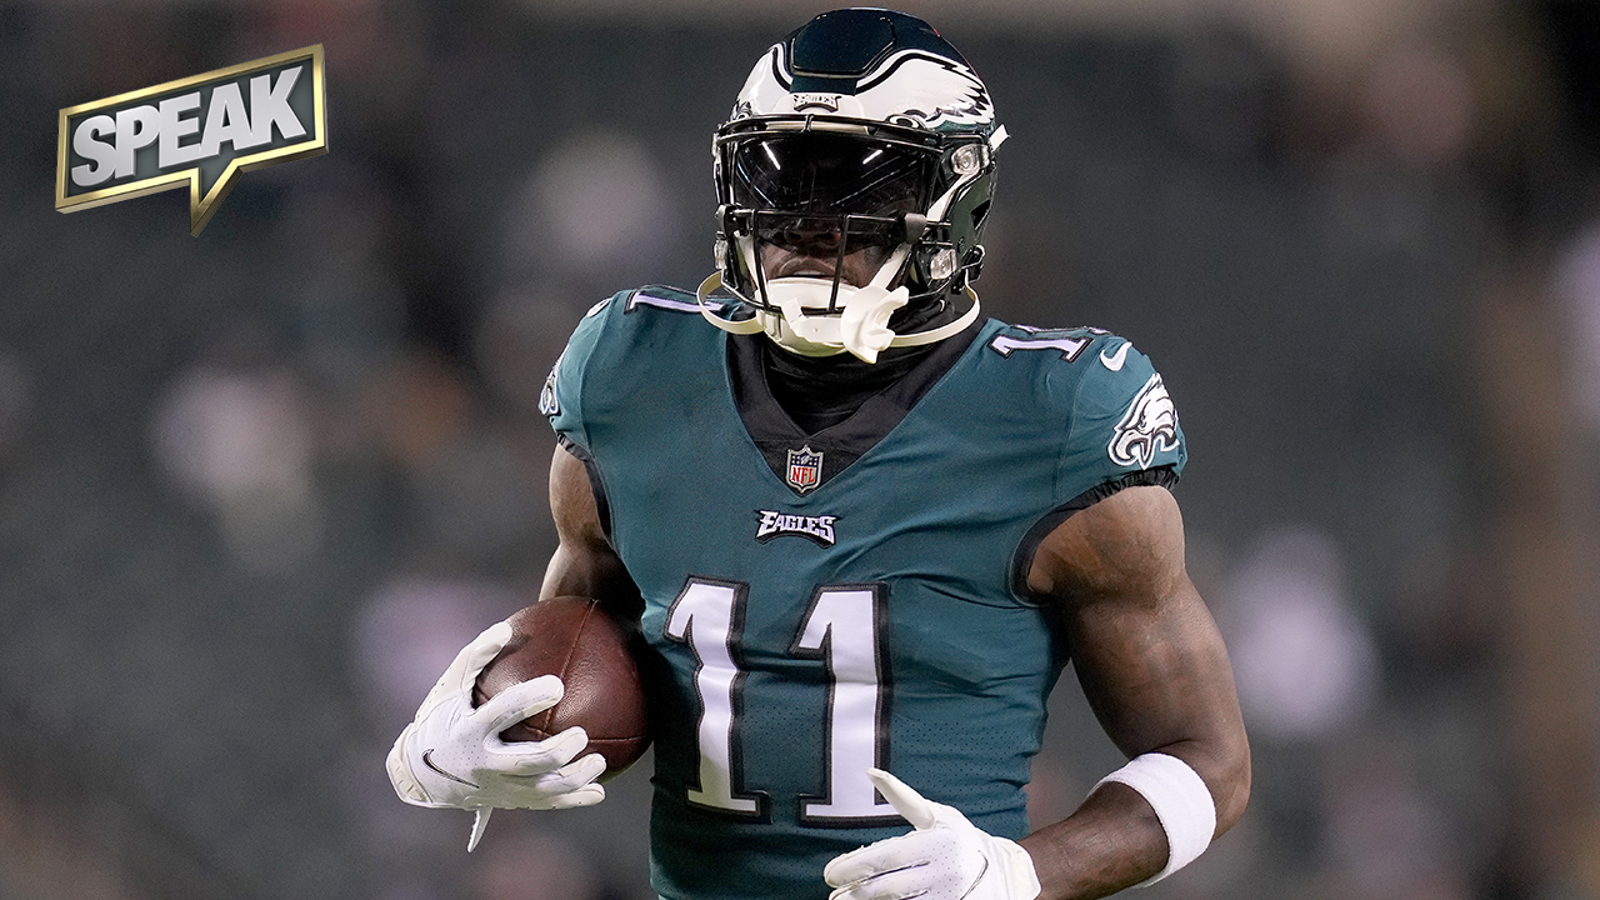 Eagles WR A.J. Brown on first loss: "Now we're going to wake up."